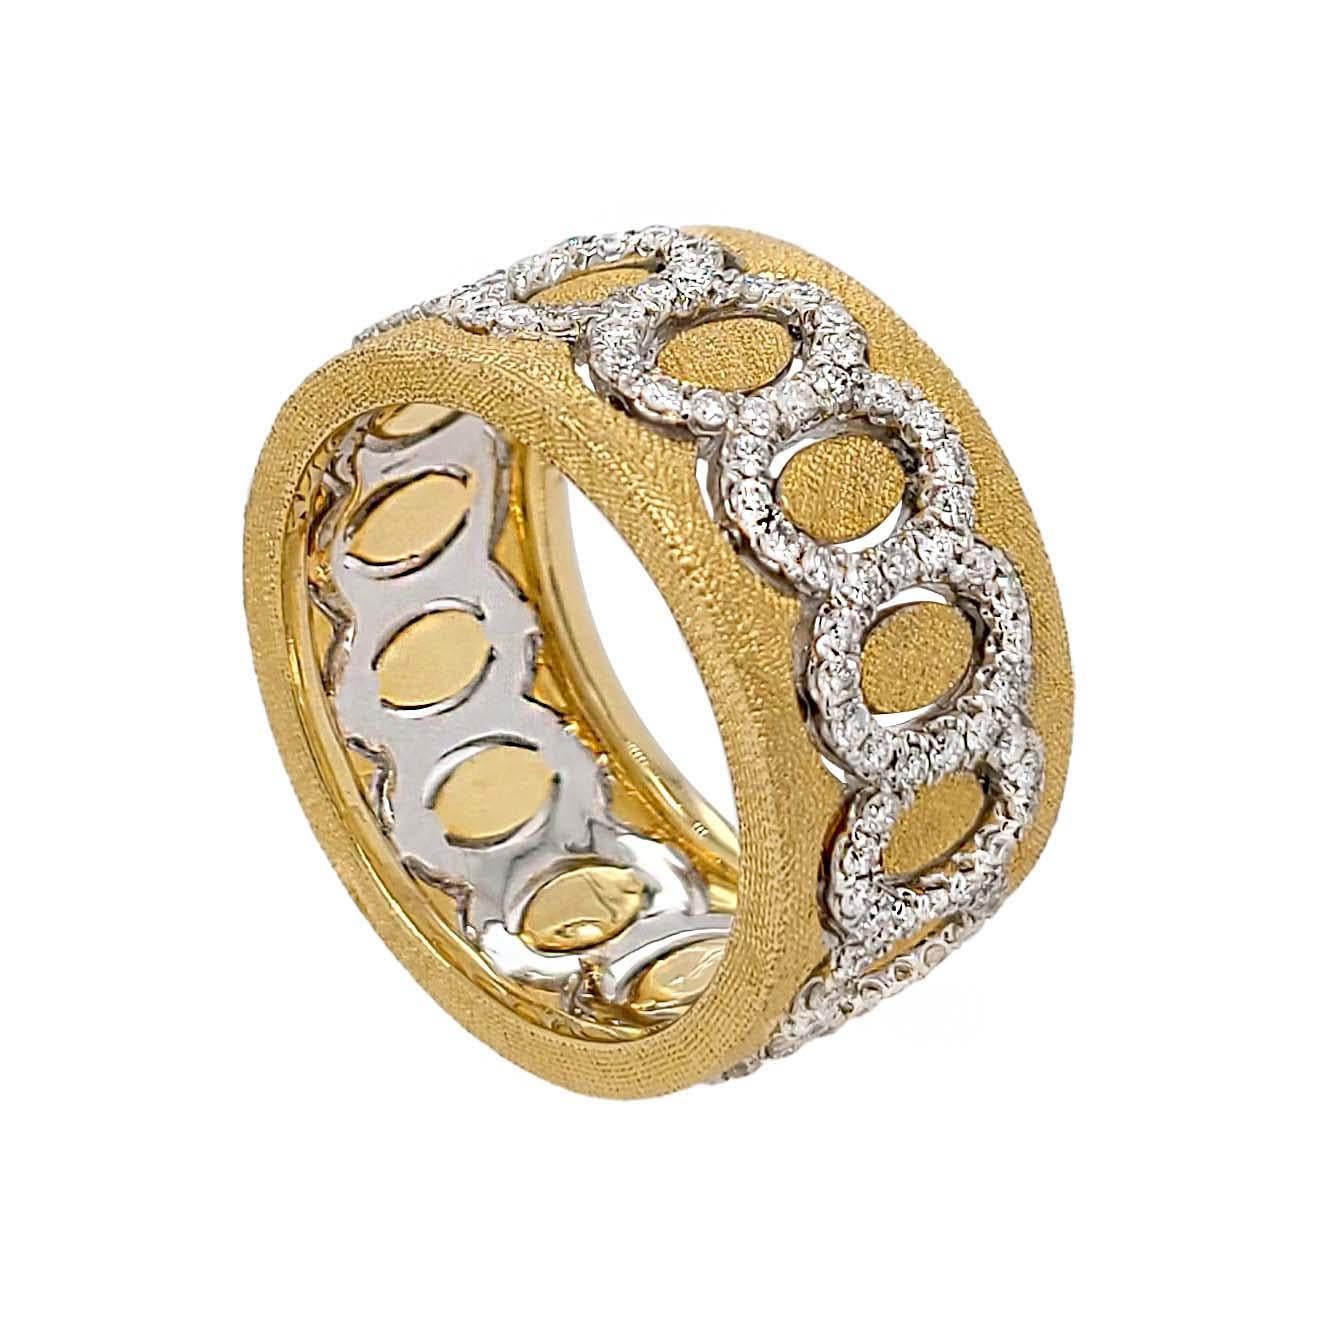 Produced by award winning Italian designer Stefano Vitolo. Stefano creates custom artisanal one of a kind jewelry with excellent gemstones in a truly old world Italian craftmanship.
This handcrafted ring has 0.78 total carat weight of F/G color and